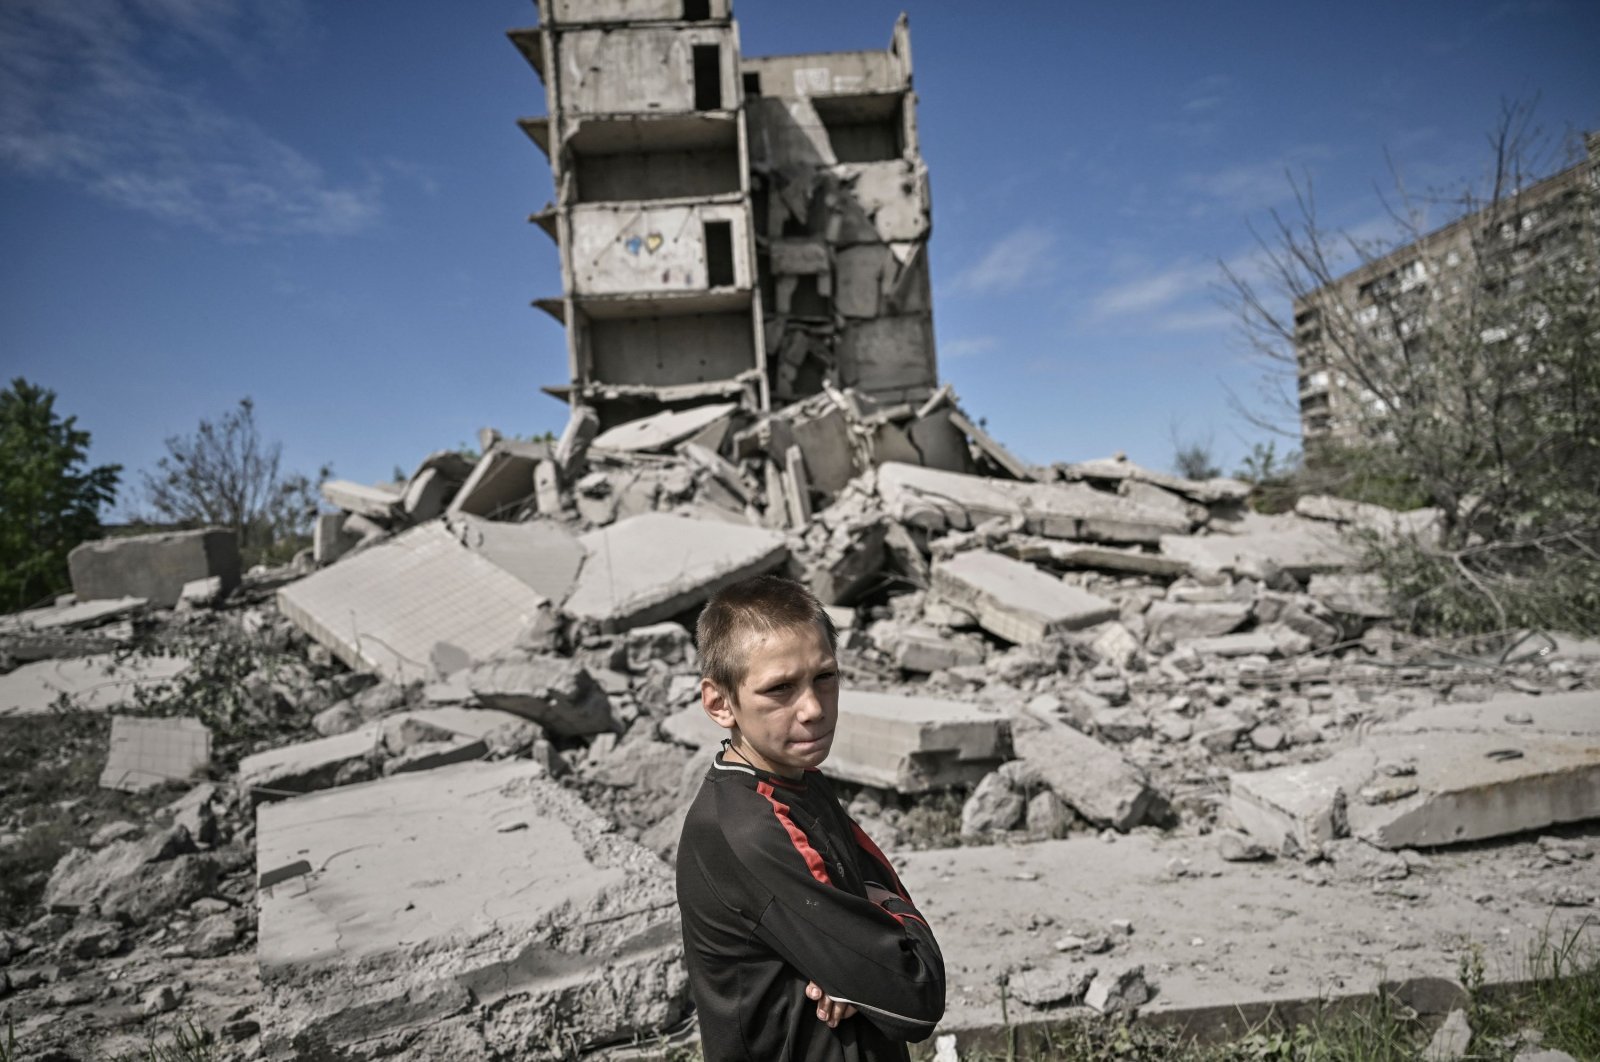 A young boy stands in front of a damaged building after a strike in Kramatorsk in the eastern Donbass region, Ukraine, May 25, 2022. (AFP Photo)